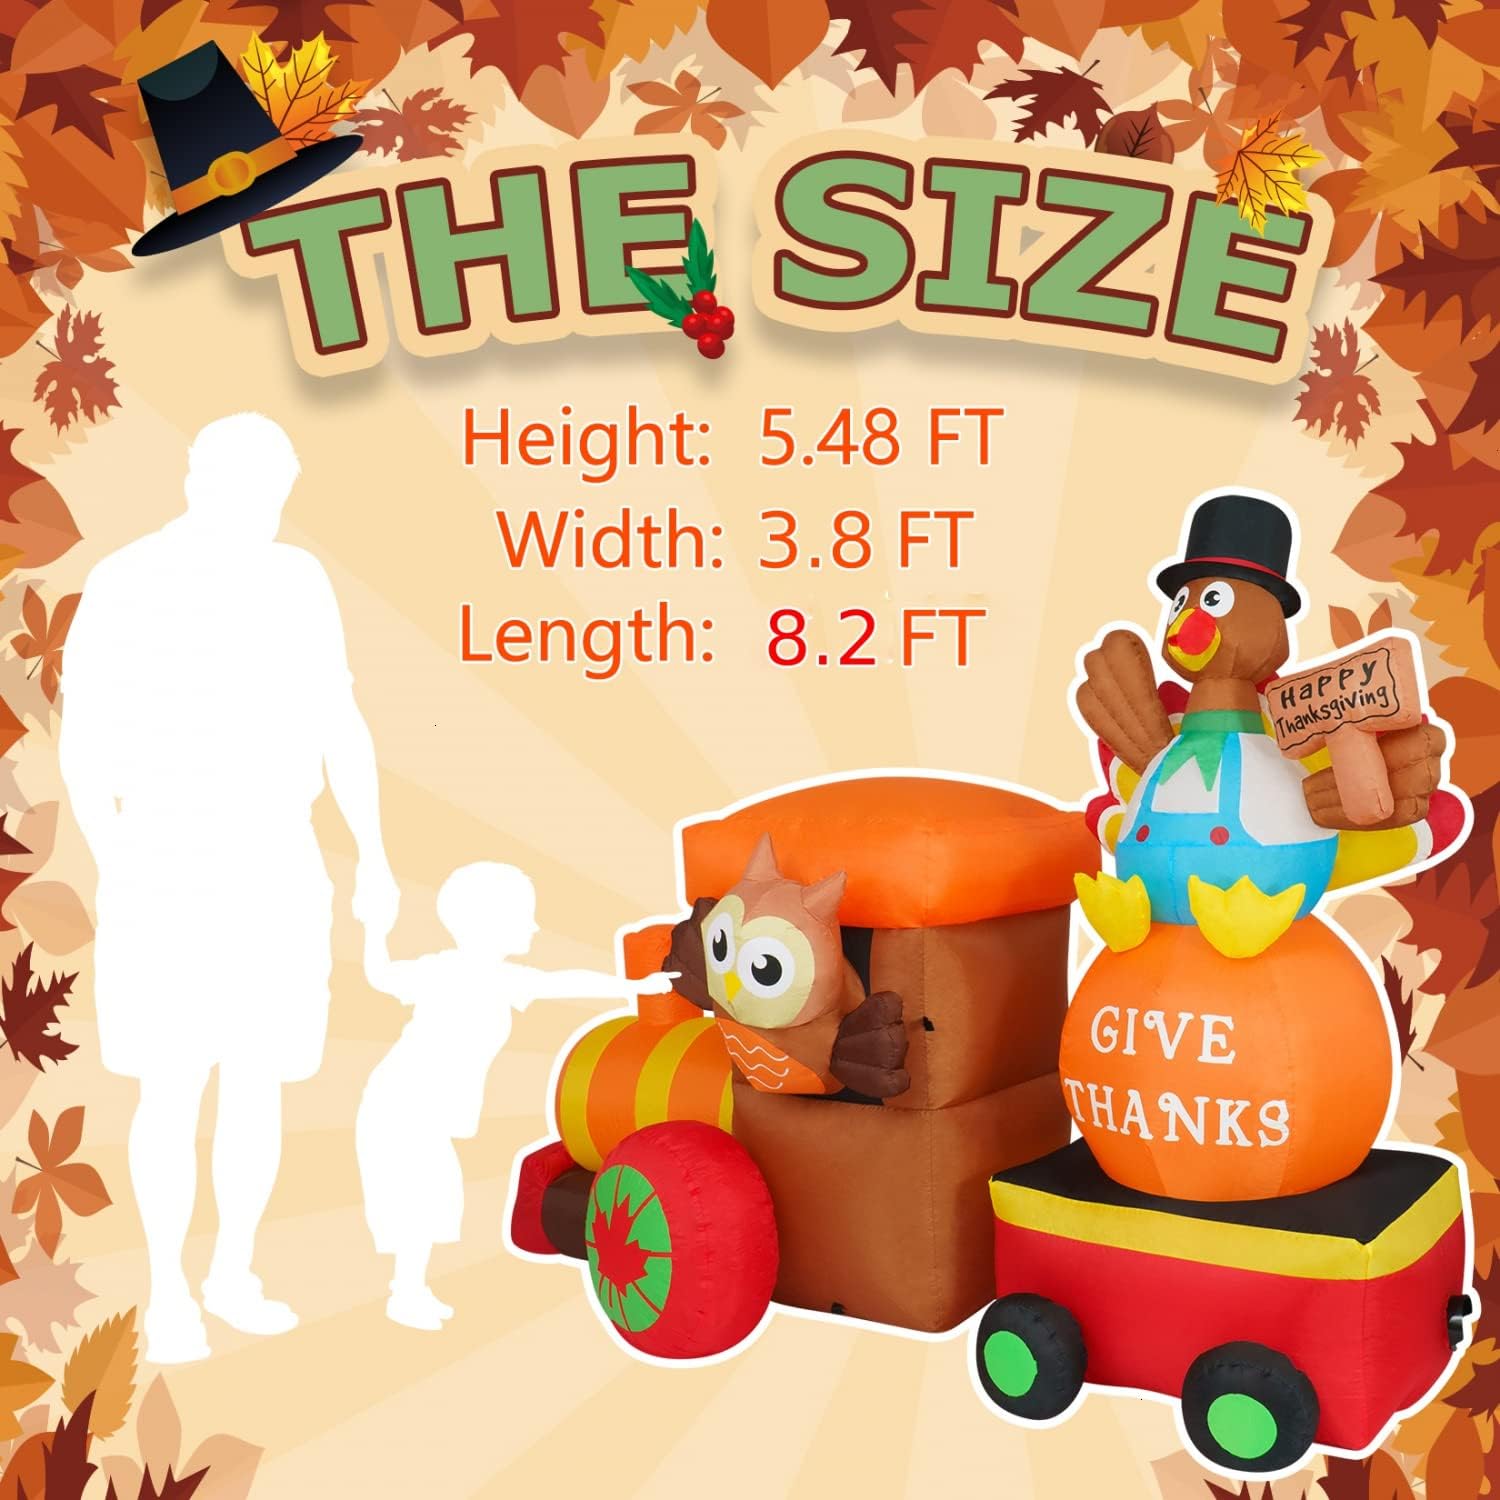 JETEHO 7 Ft Happy Thanksgiving Inflatable Turkey Riding in a Hot Air Balloons, Giant Thanksgiving Blow up Yard Decorations, Lighted Outdoor Thanksgiving Decor for Lawn, Front Yard